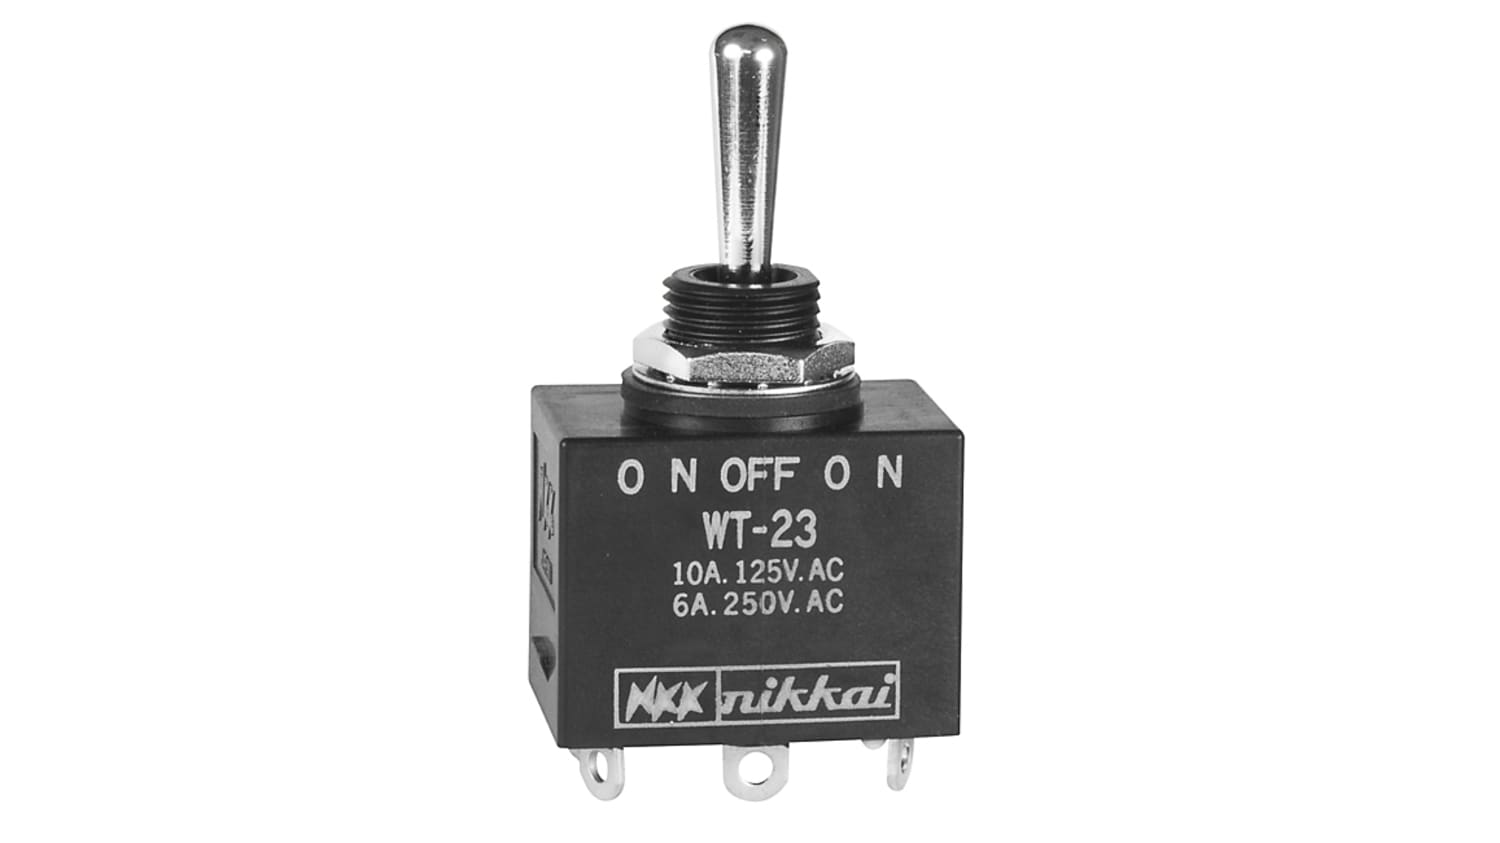 Wt23s Nkk Switches トグルスイッチ On Off On Dpdt パネルマウント 10 A Rs Components